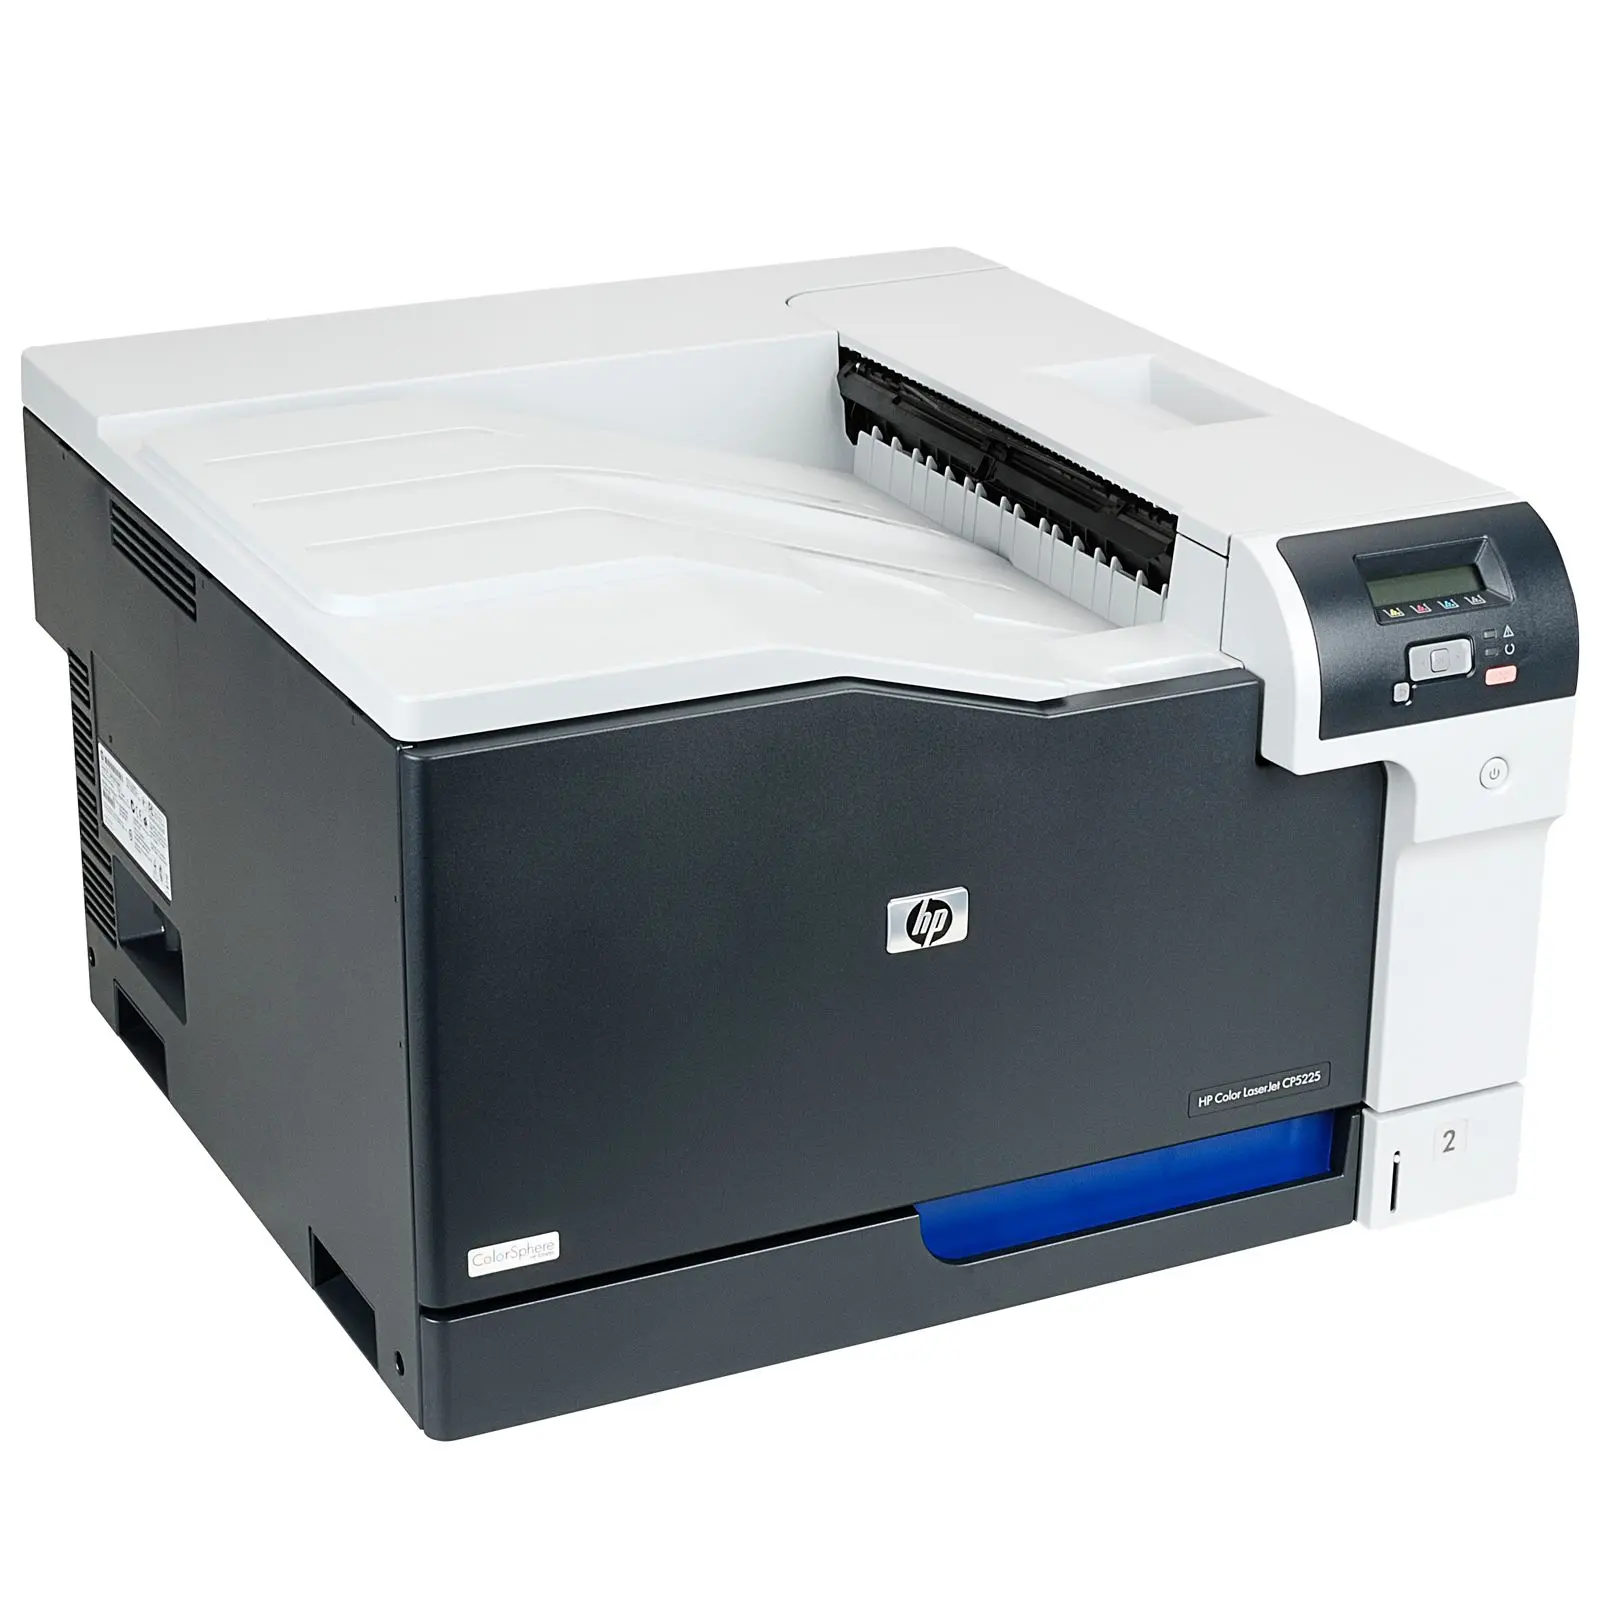 hewlett packard color laserjet cp5225dn - What is the difference between CP5225dn and CP5225n